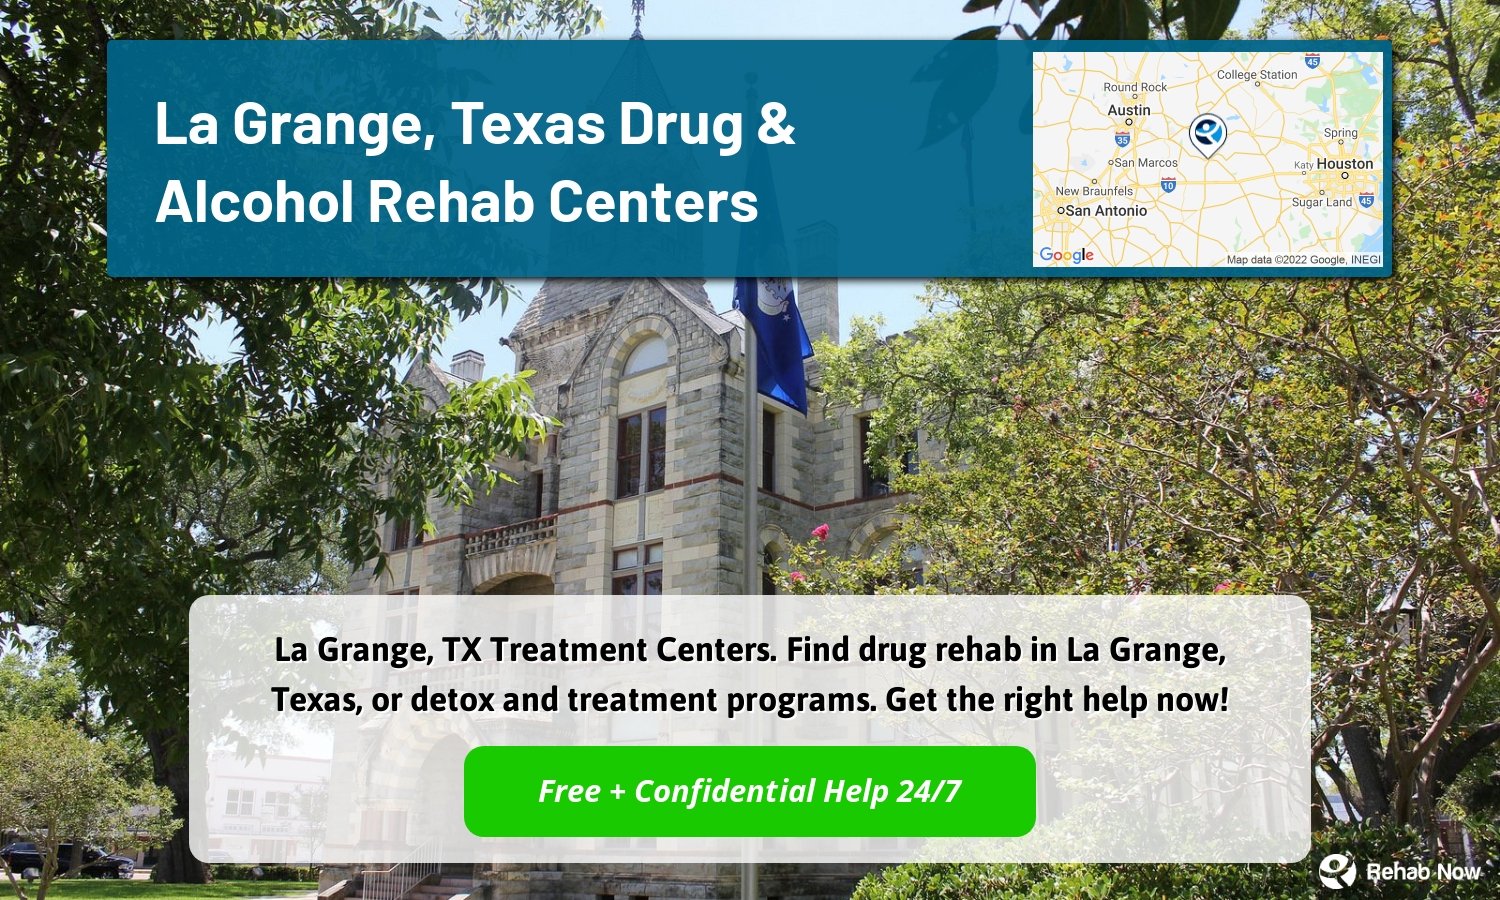 La Grange, TX Treatment Centers. Find drug rehab in La Grange, Texas, or detox and treatment programs. Get the right help now!